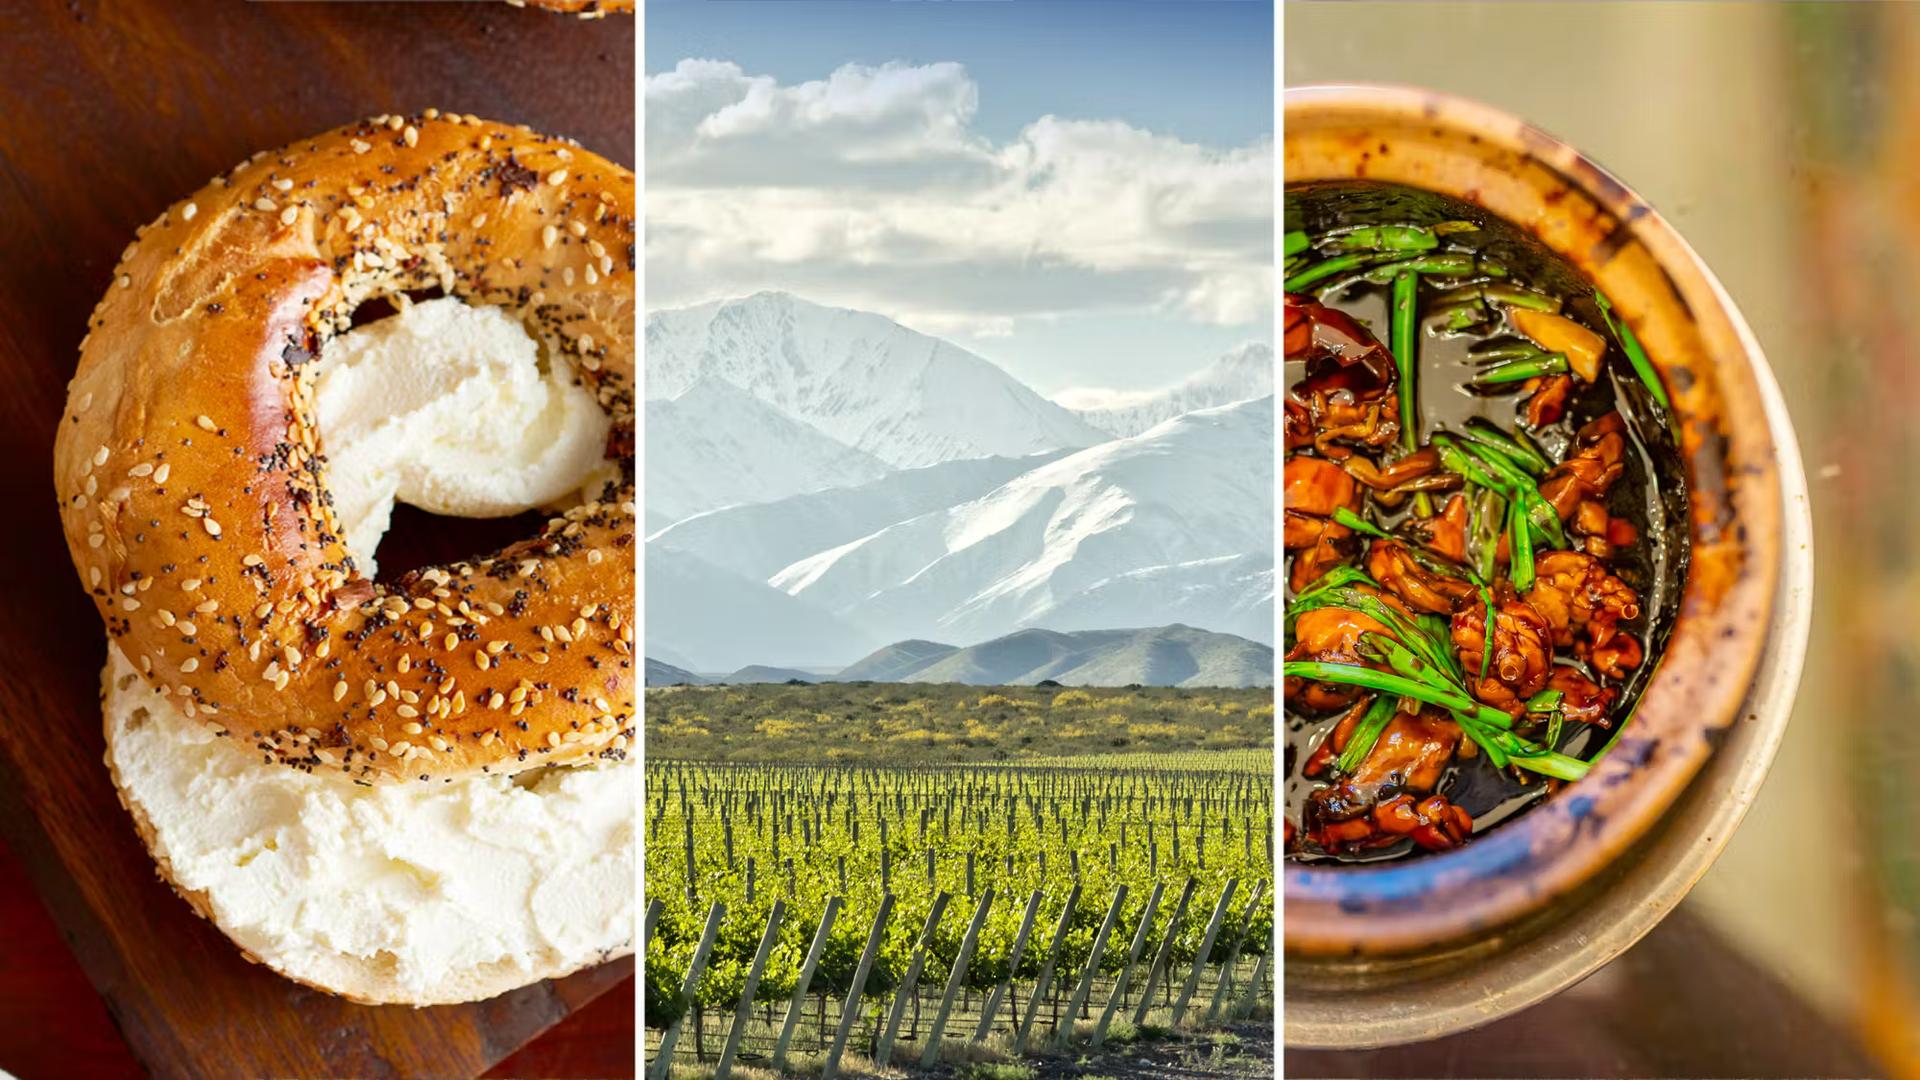 A famous Montreál bagel, vineyards in Argentina's wine country, and Singapore braised frog and spring onion in clay pot. 